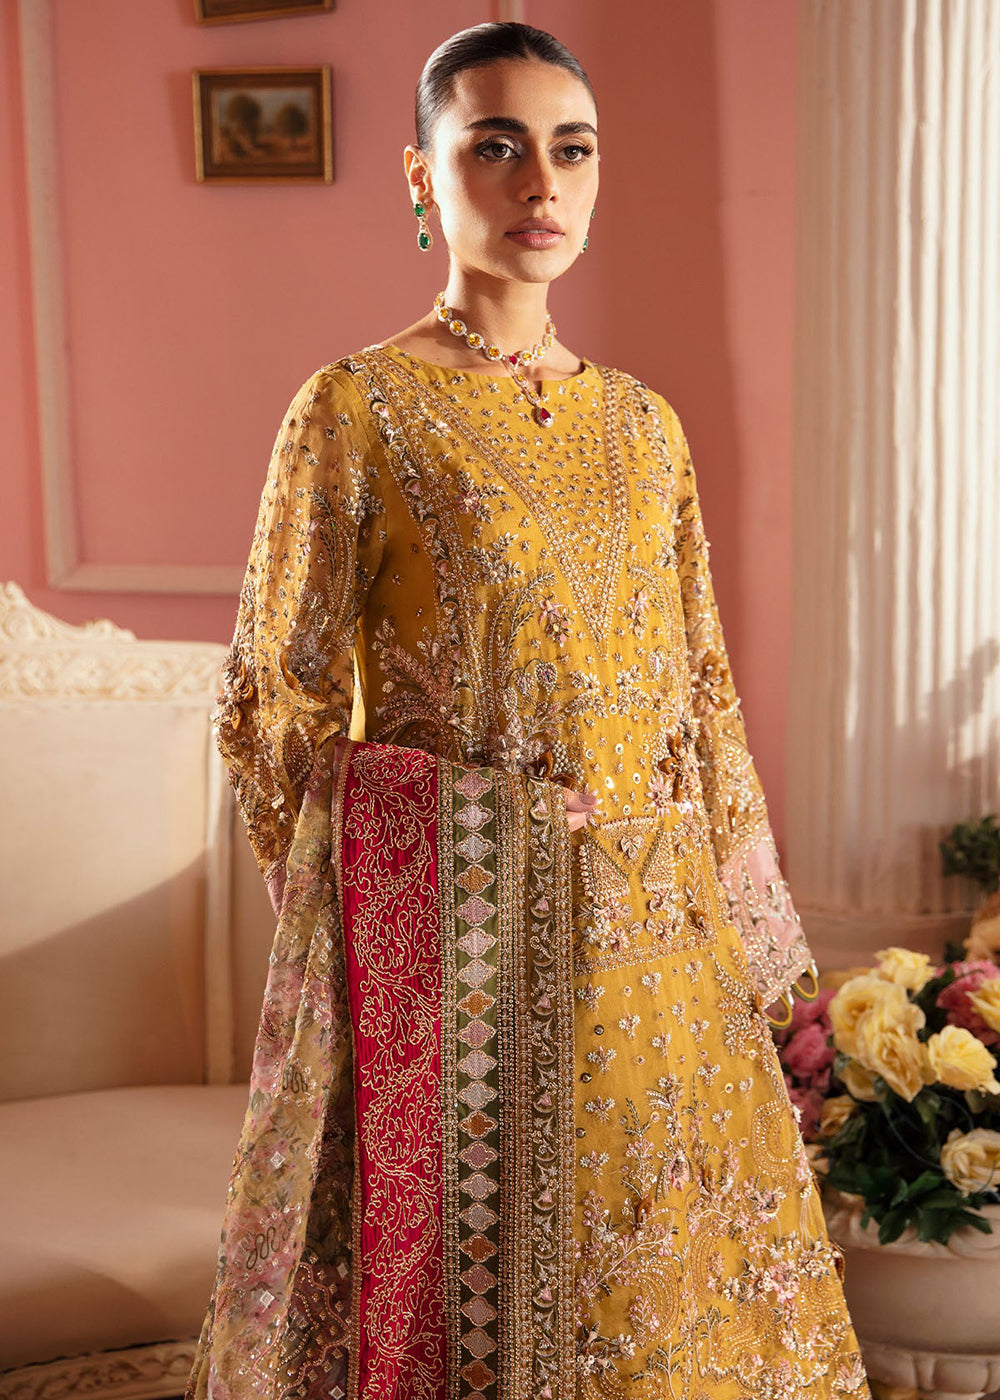 Buy Now The Secret Garden Luxury Unstitched Formals '24 by Nureh | FLORENCE Online at Empress Online in USA, UK, Canada & Worldwide at Empress Clothing.